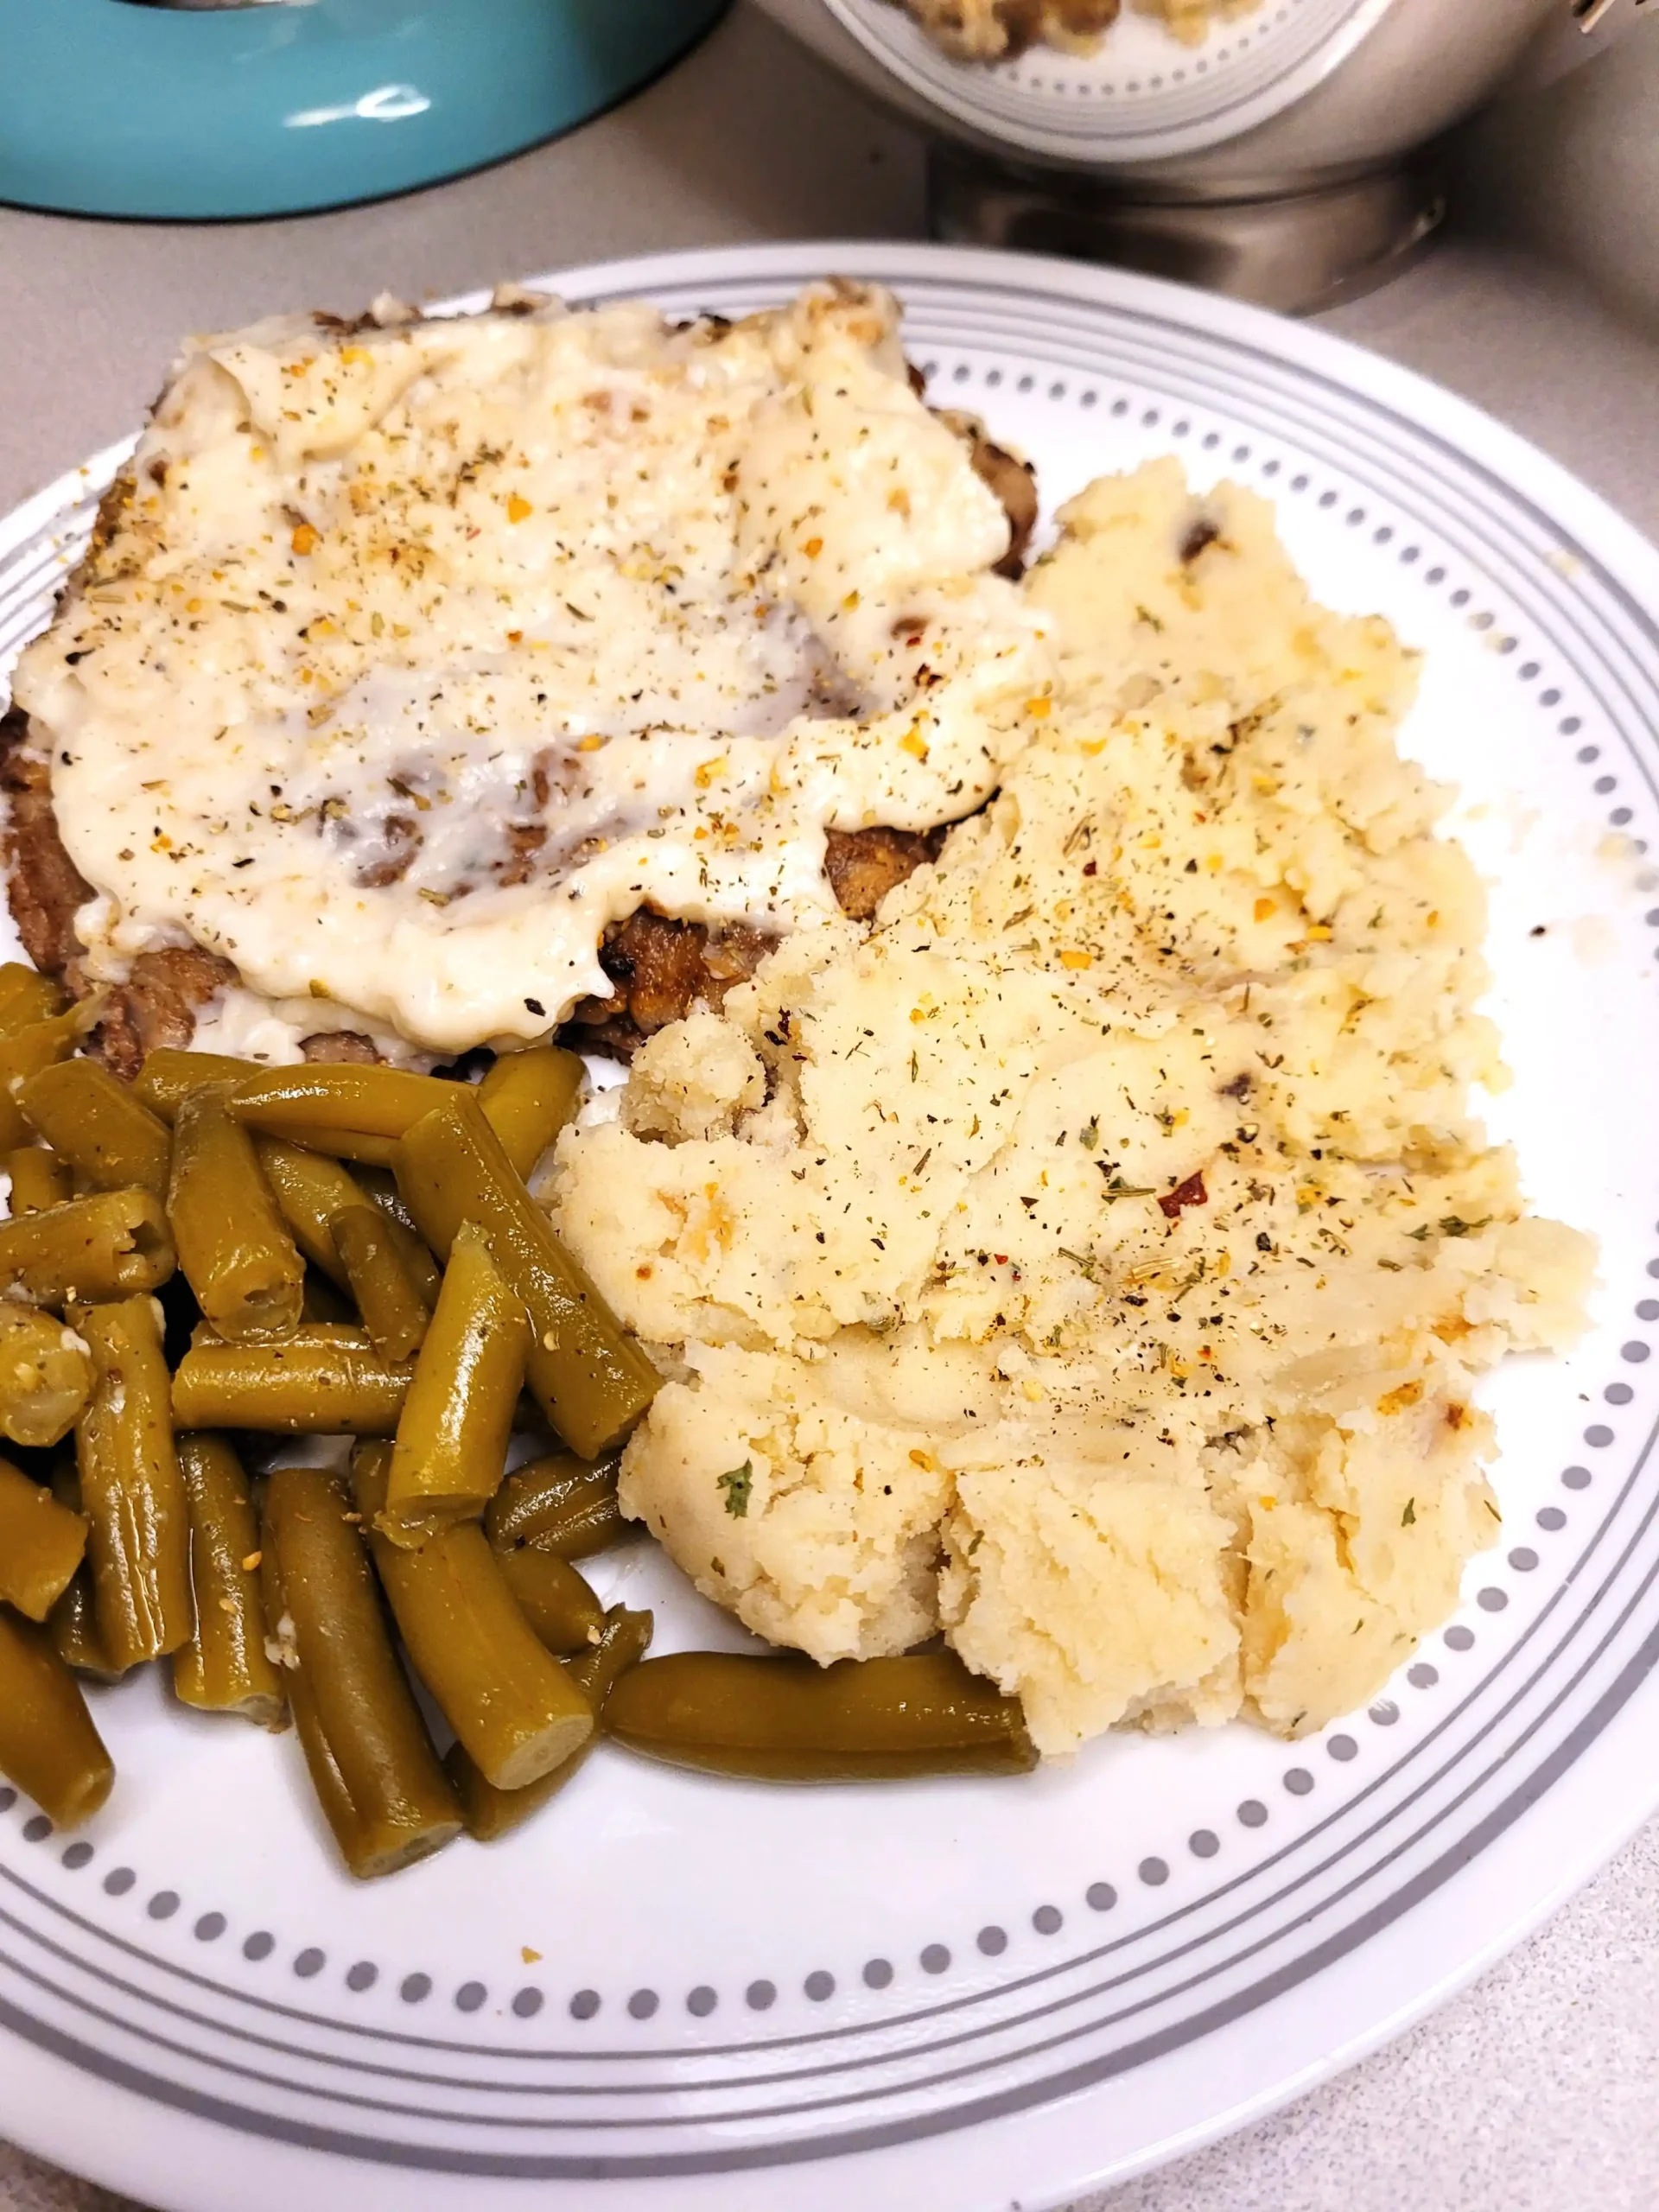 Cream cheese mashed potatoes with green beans and country fried cube steak on a plate.